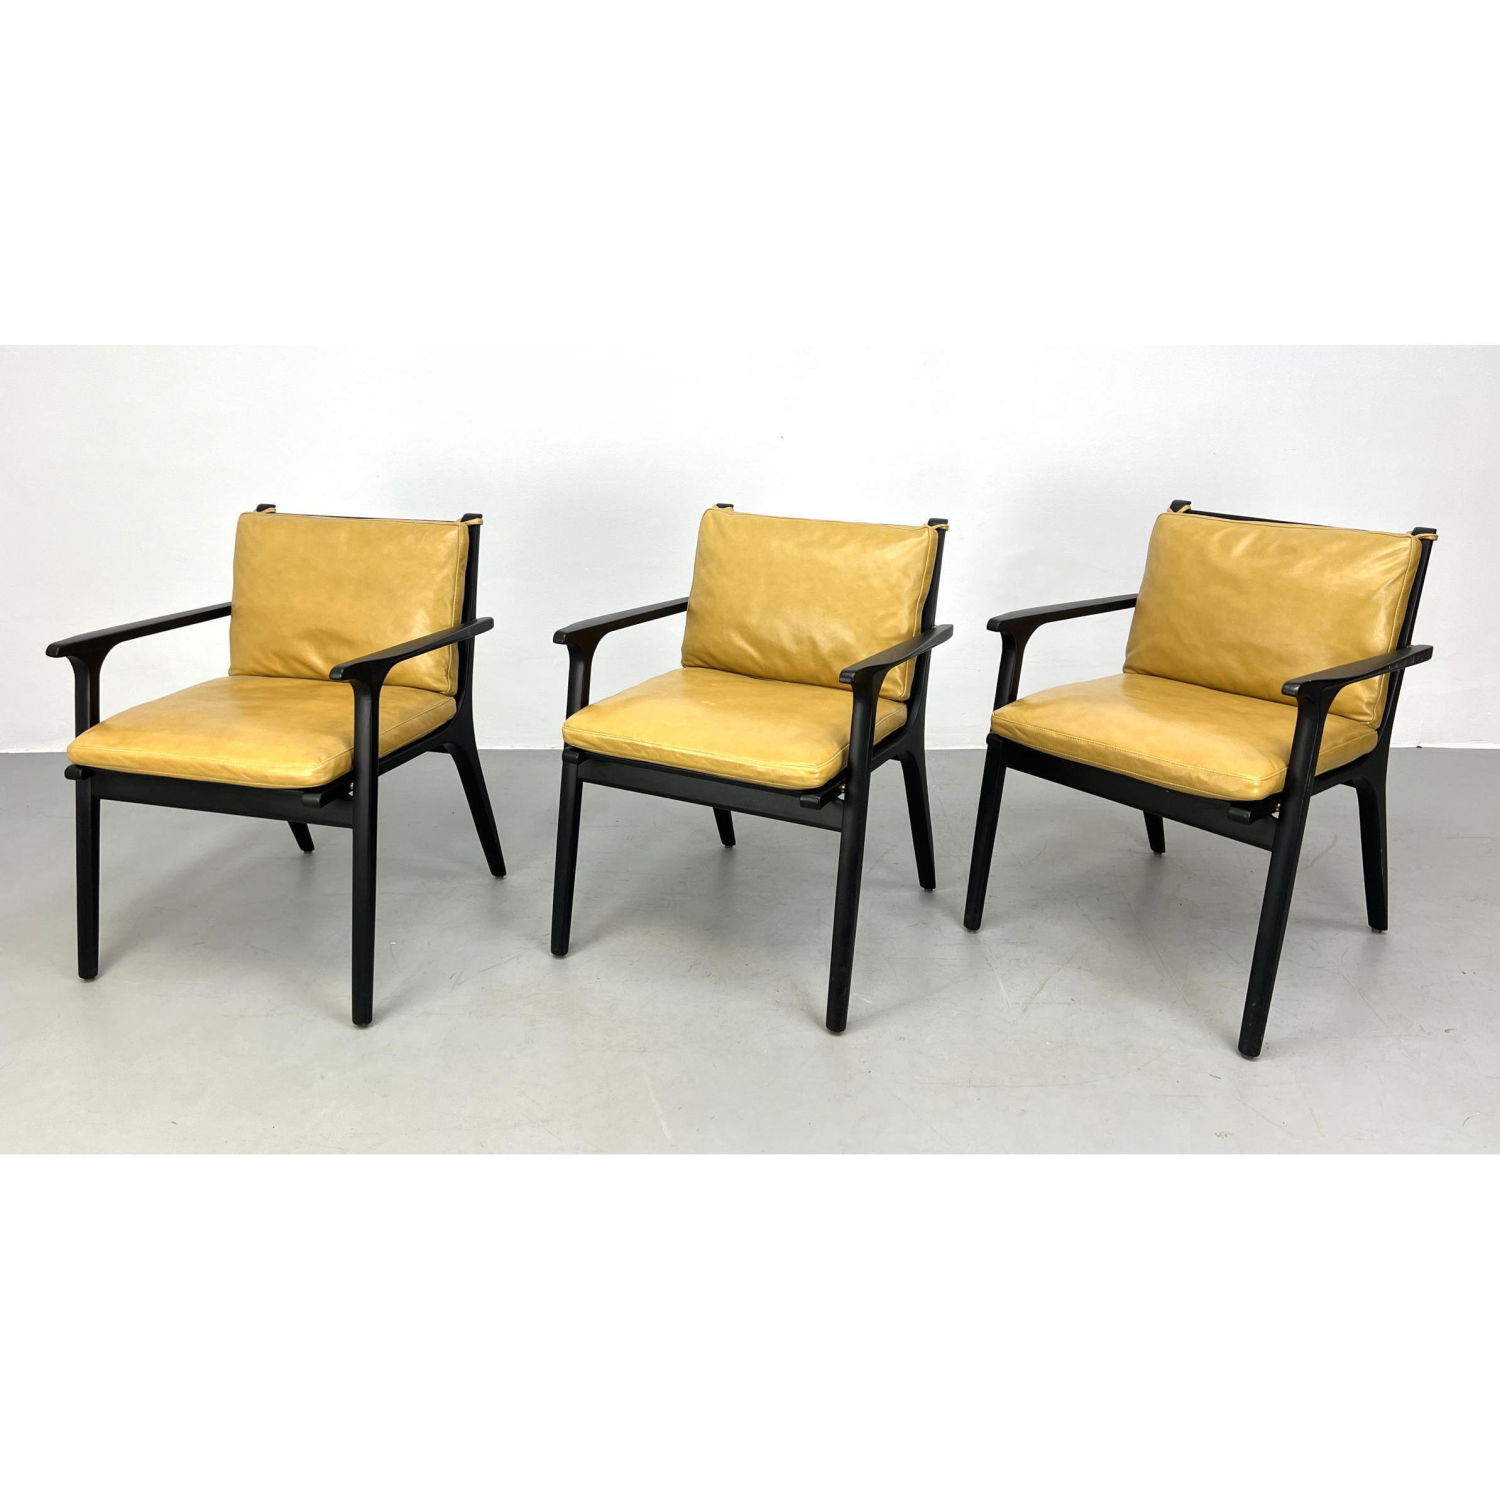 3pc Ren dining chair designed by